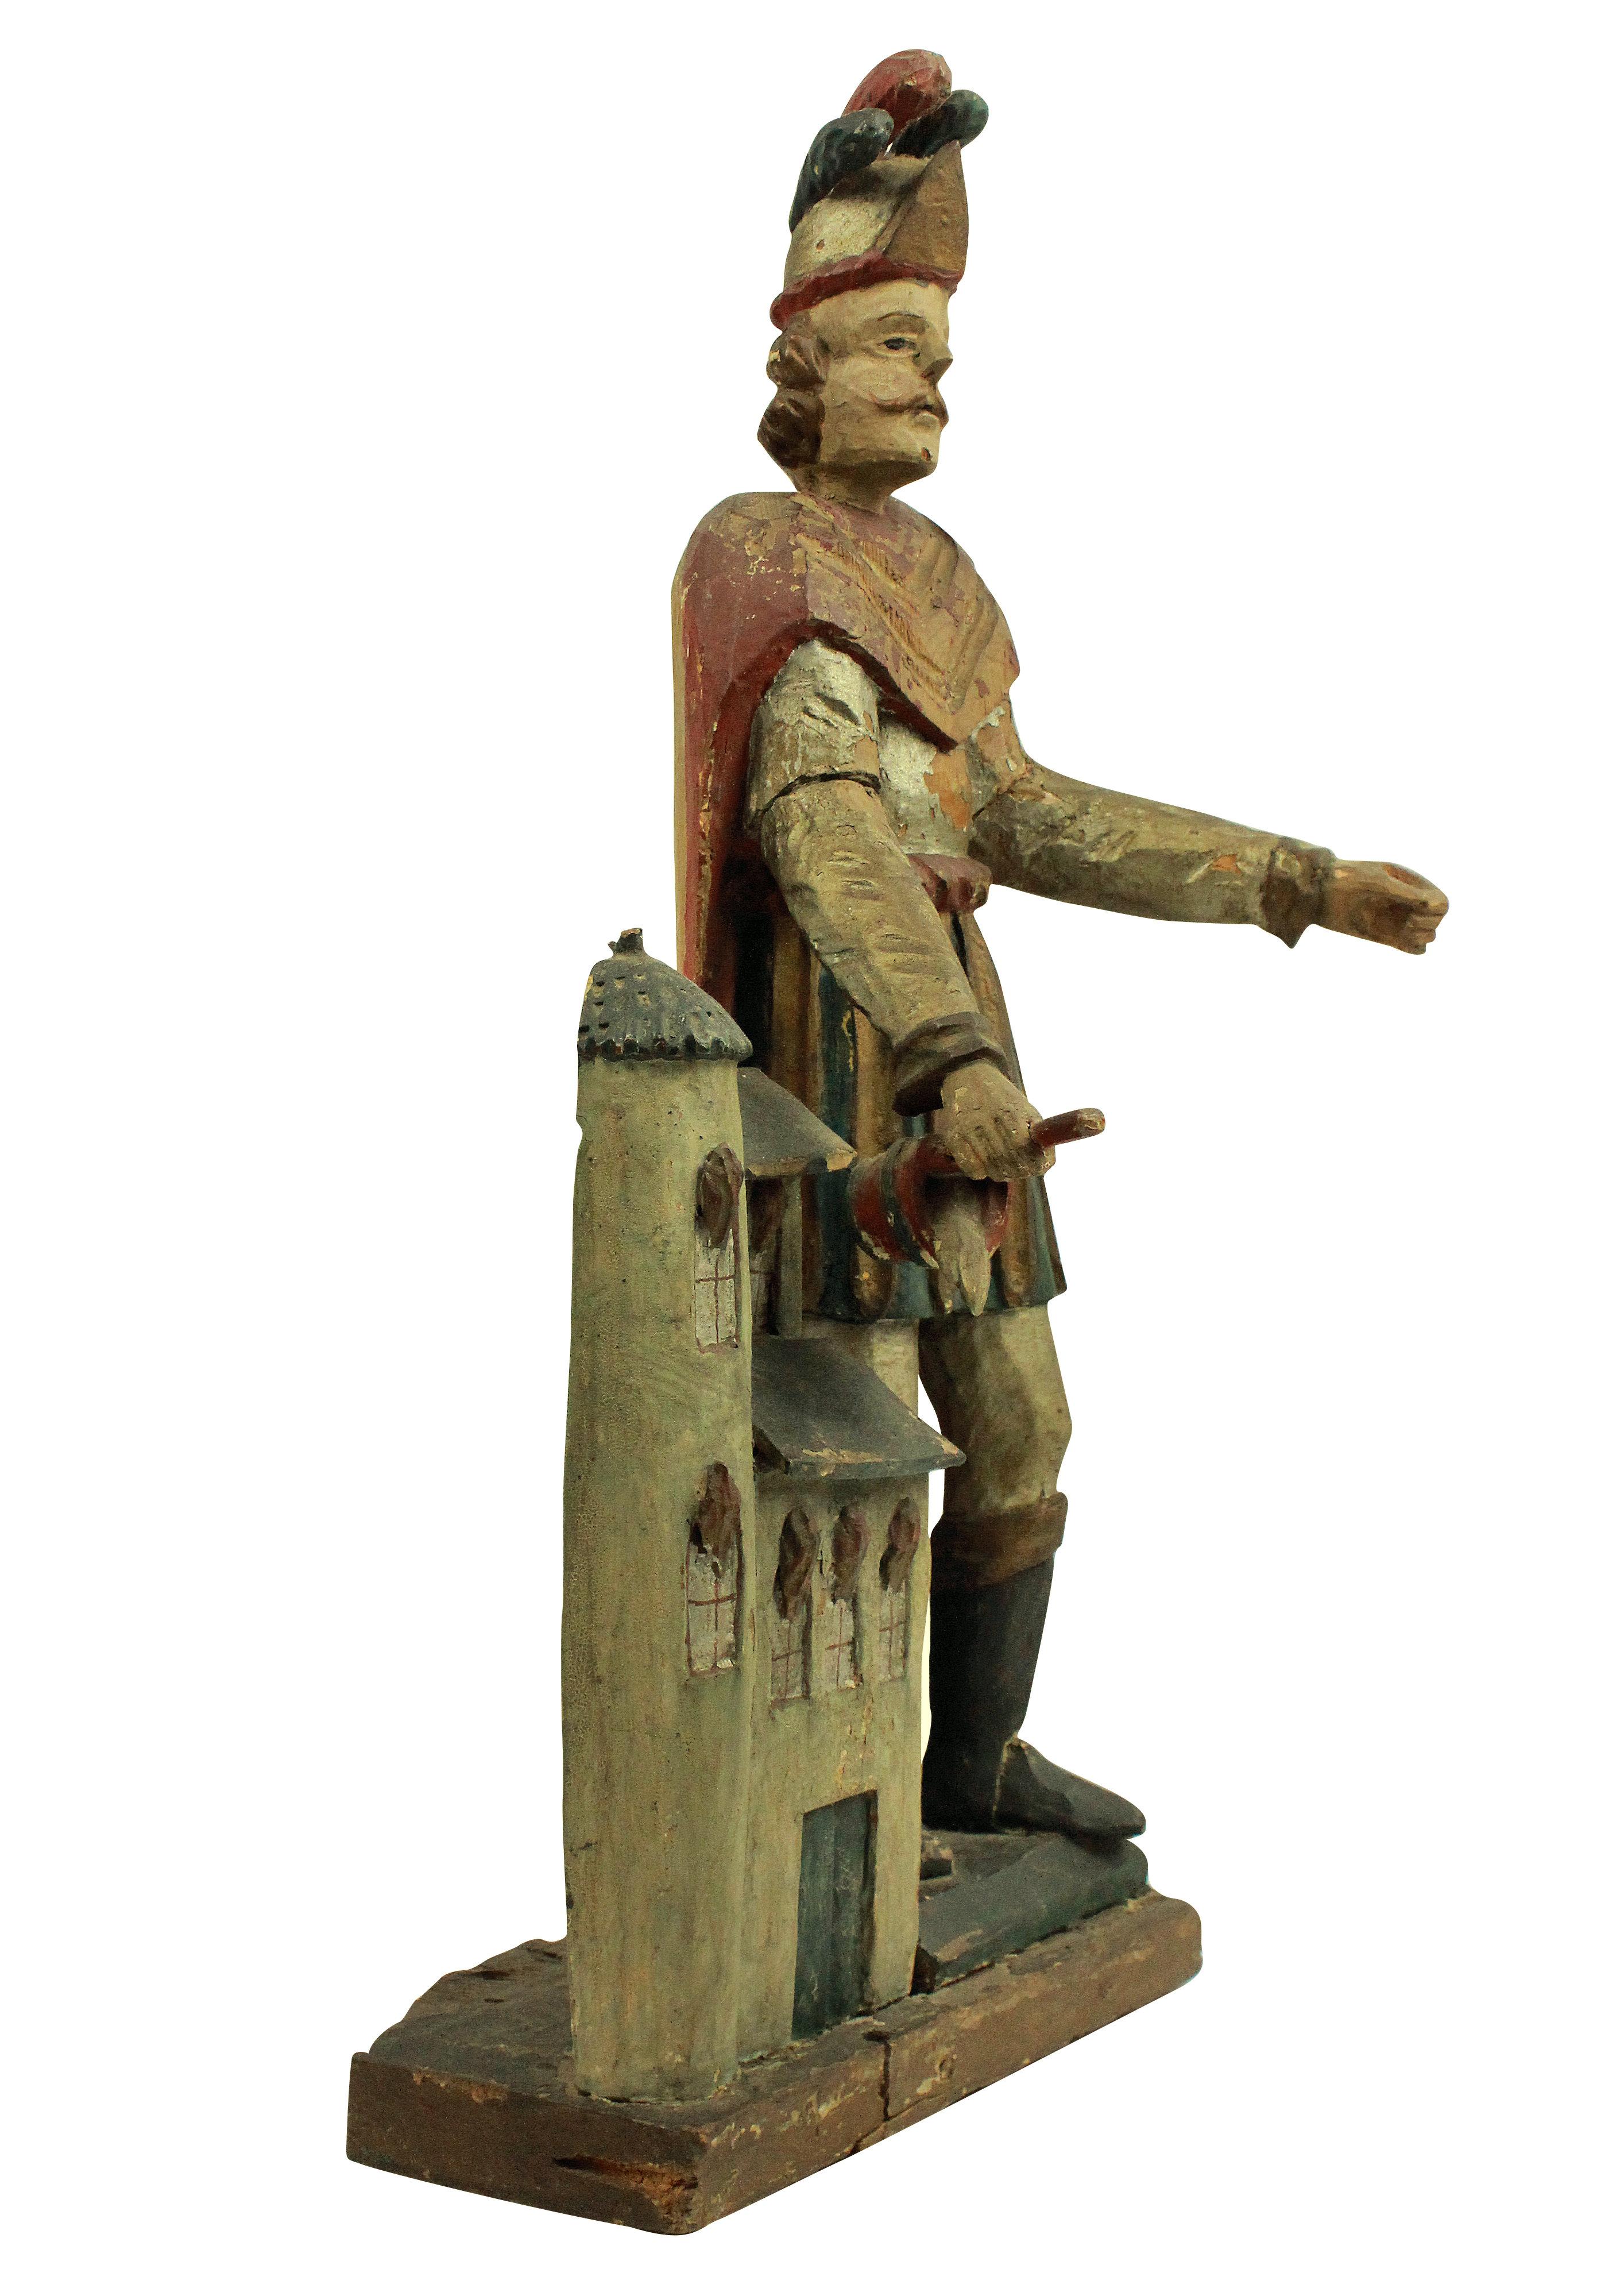 A French late 18th century statue of St Florian, in carved fruitwood with polychrome paints. Missing his spear.

The patron Saint of Austria, chimney sweeps, fire fighters and brewers.